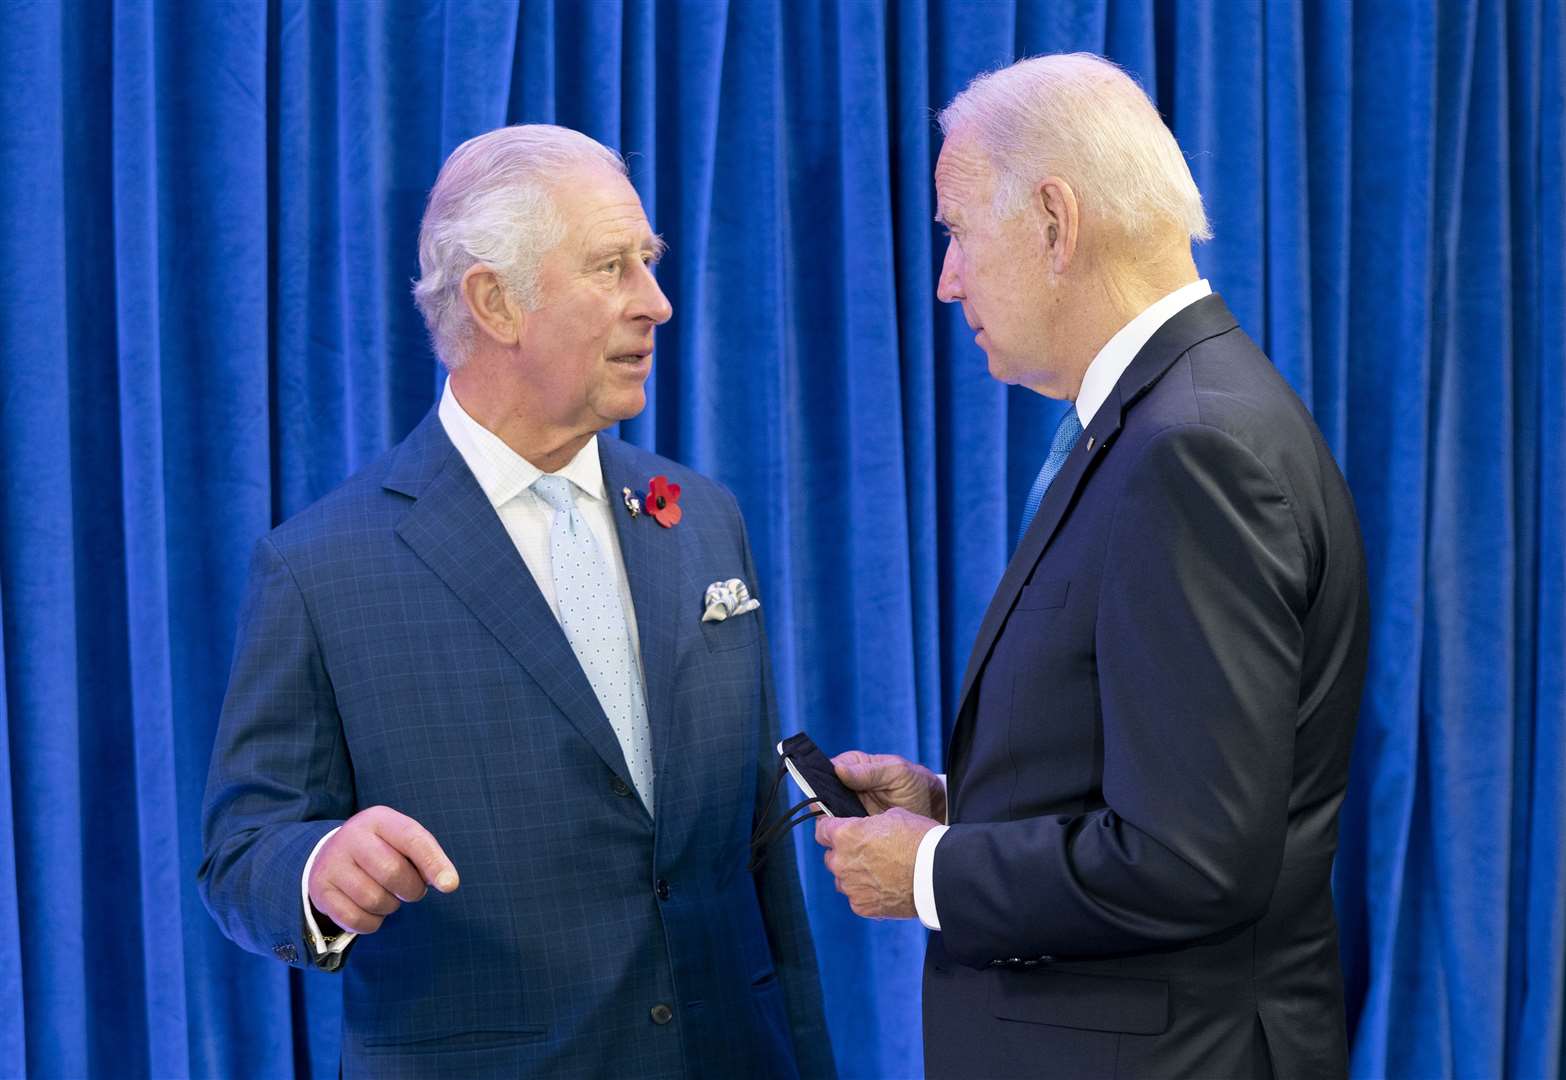 The King and Mr Biden will discuss the climate crisis (Jane Barlow/PA)